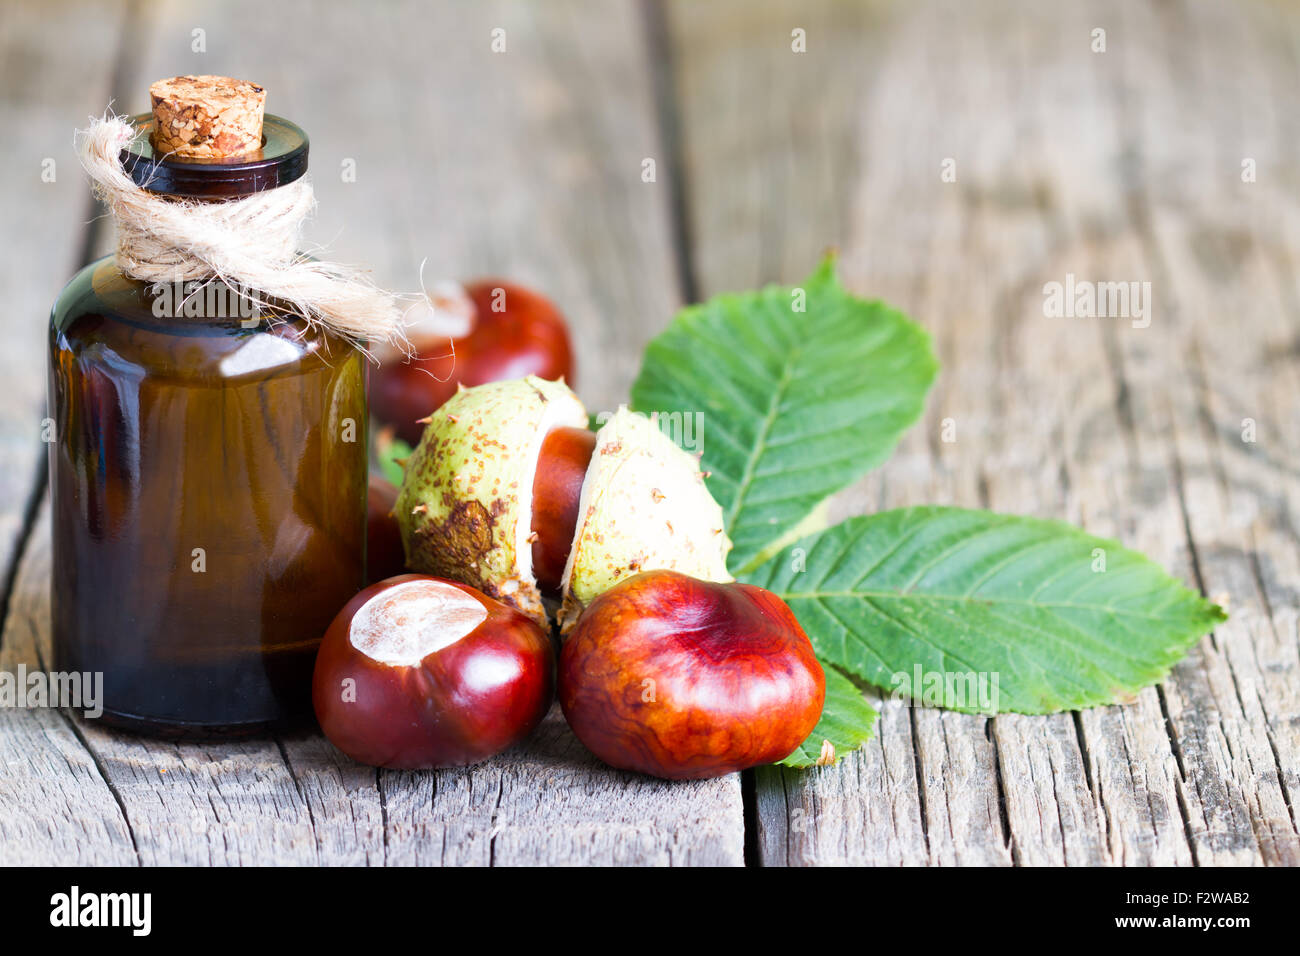 Chestnut extract in the bottle closeup on boards Stock Photo